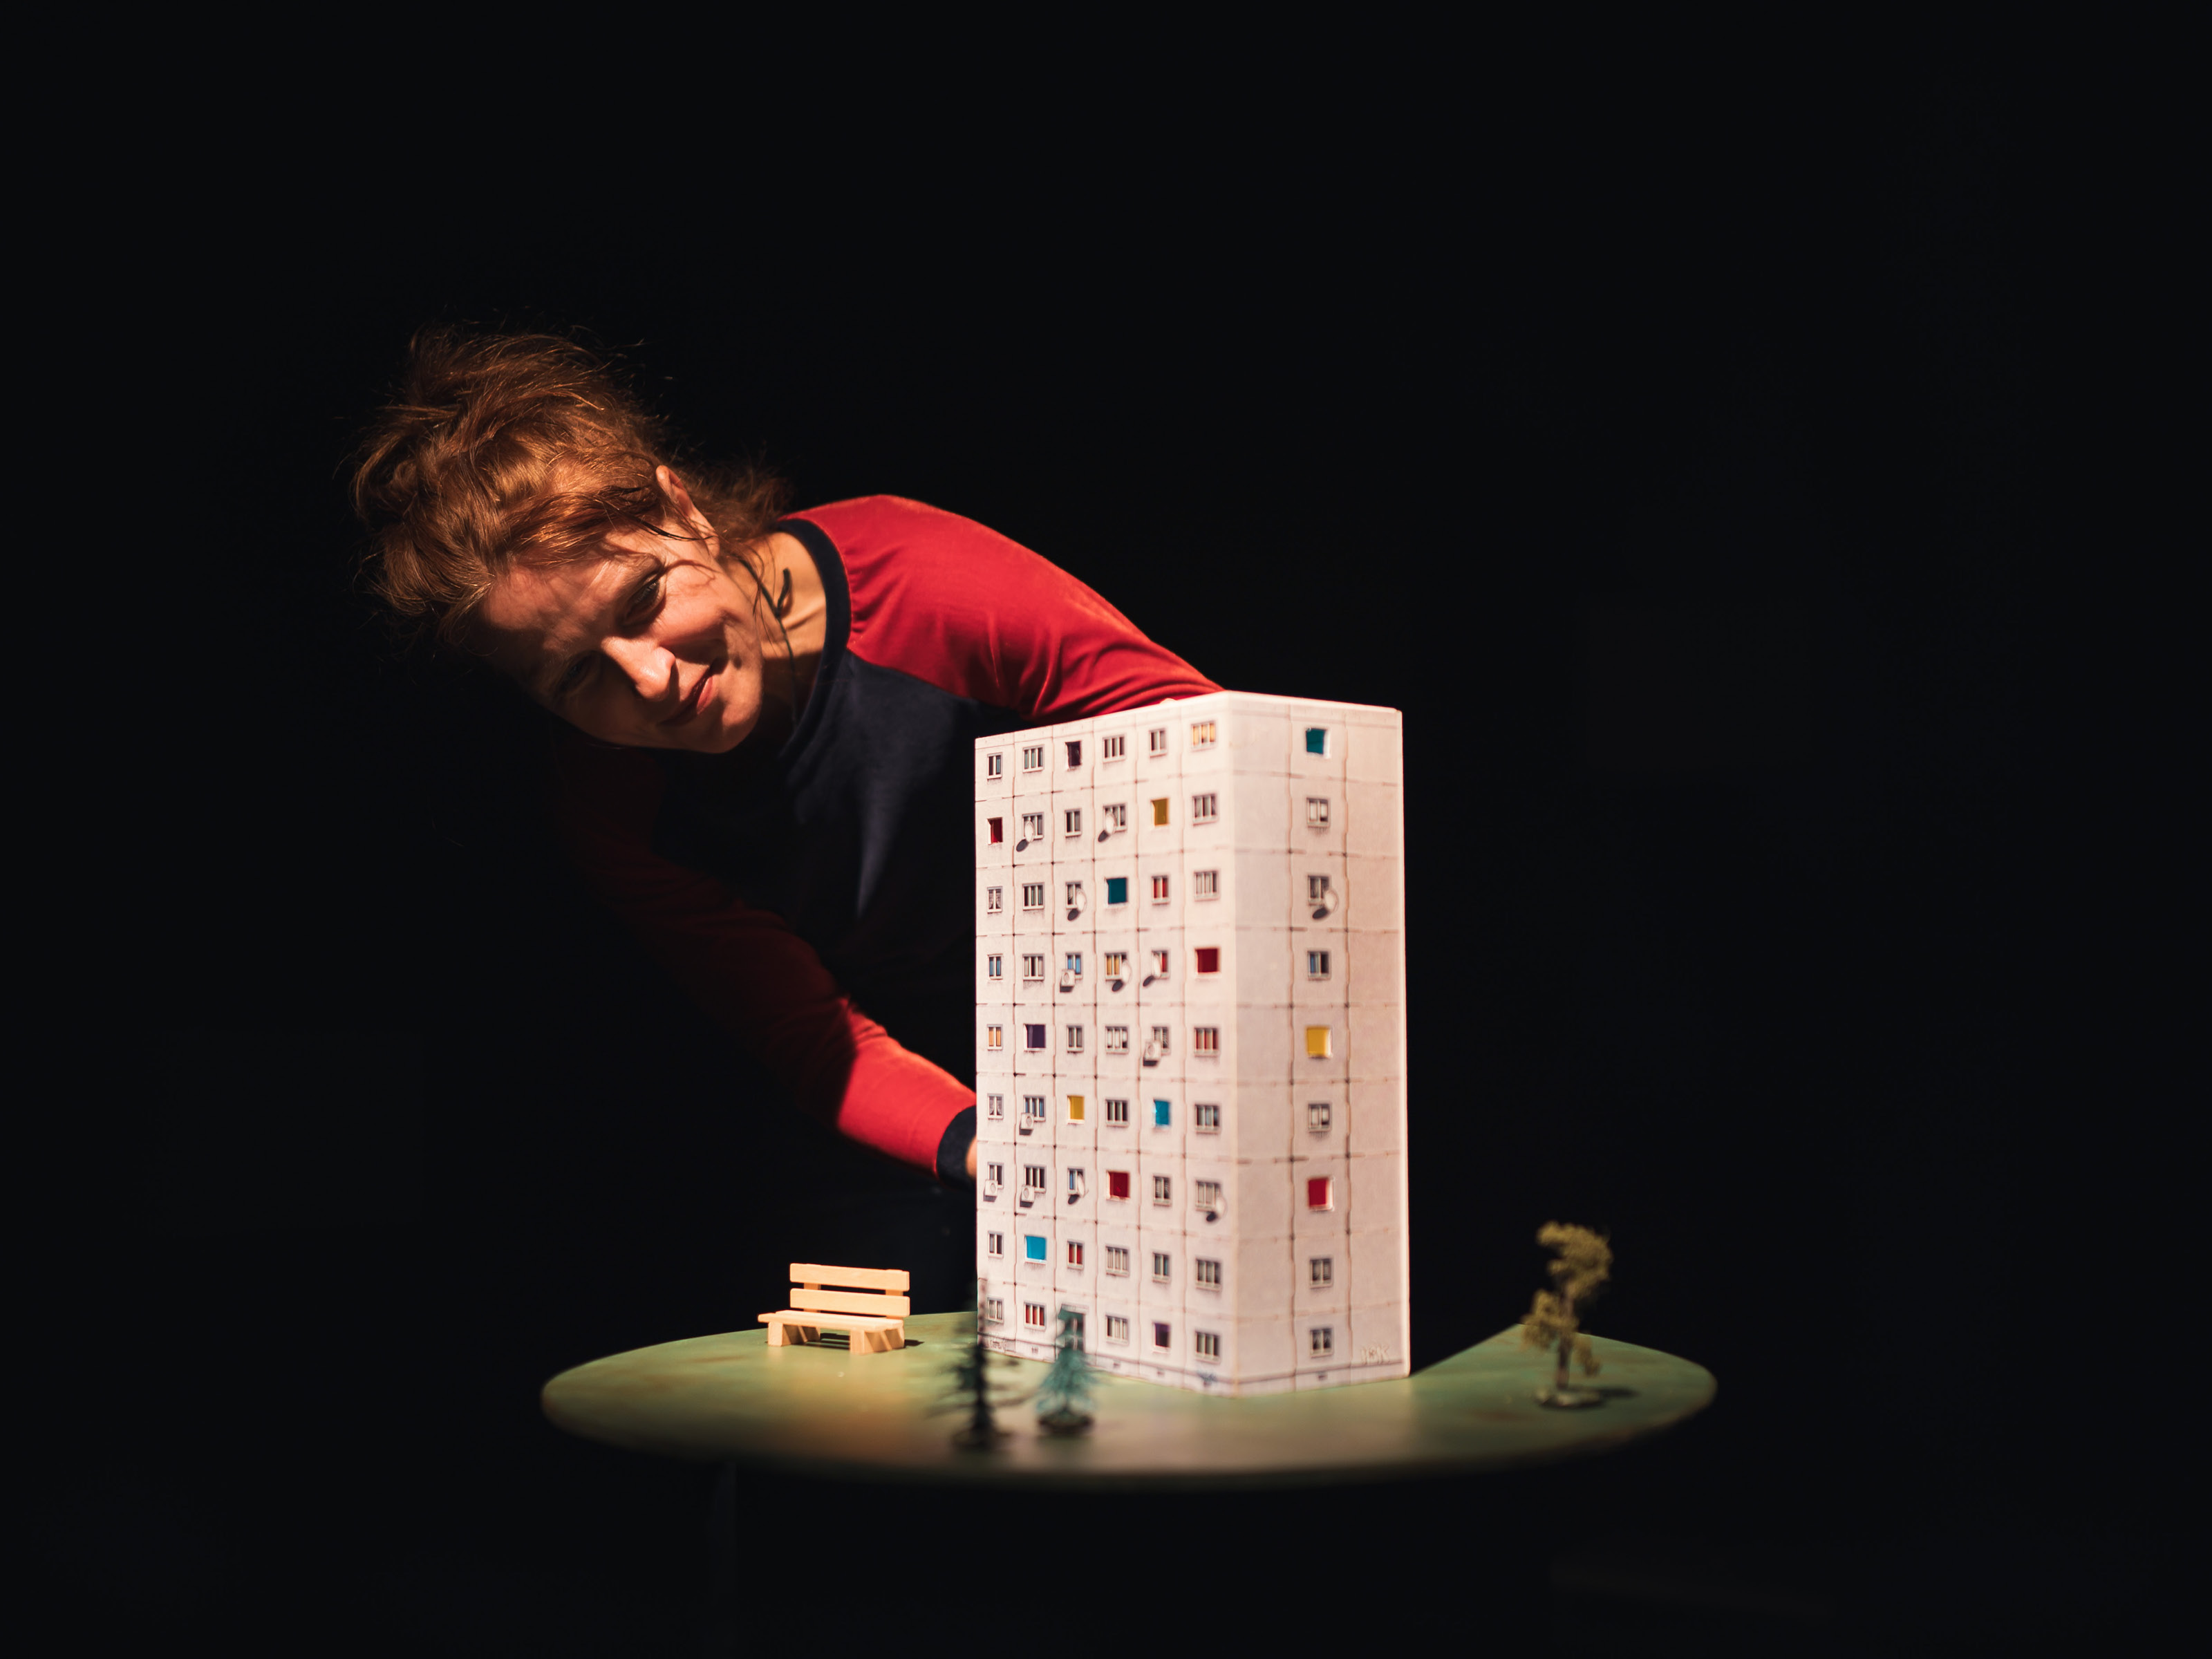 Puppeteer Annegret Geist leans over a nine-storey tower block. A small wooden bench stands in front of the skyscraper on an implied green area.